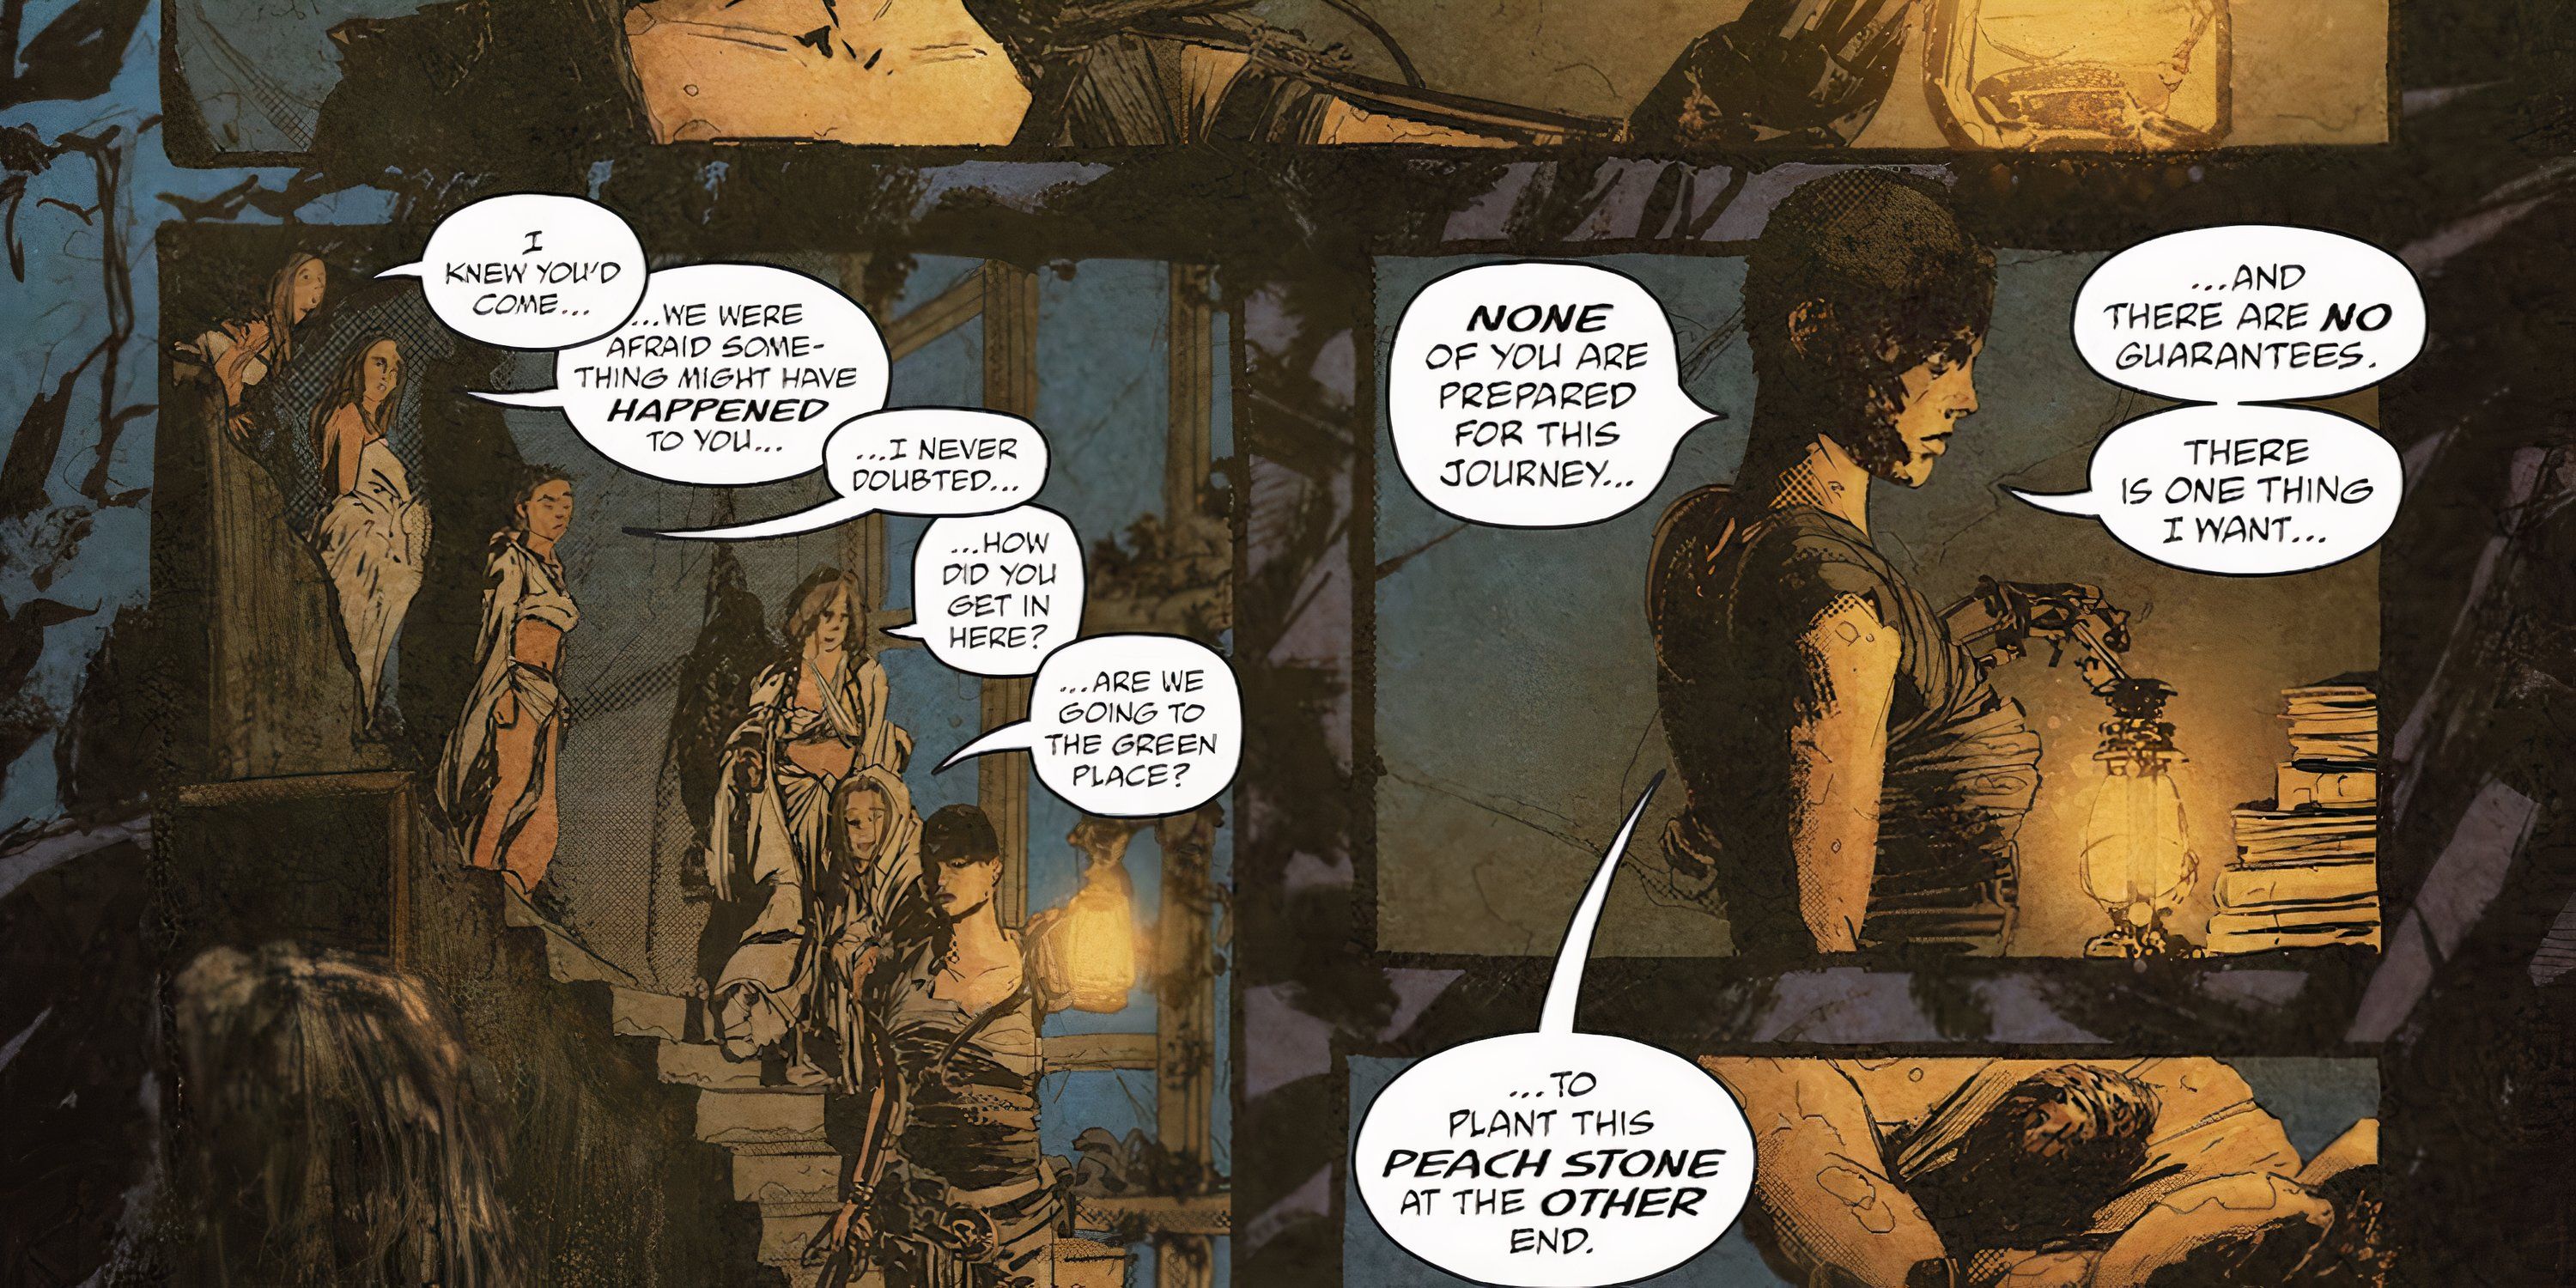 Furiosa shows a peach seed to Immortan Joe's wives in the Mad Max: Fury Road comic.